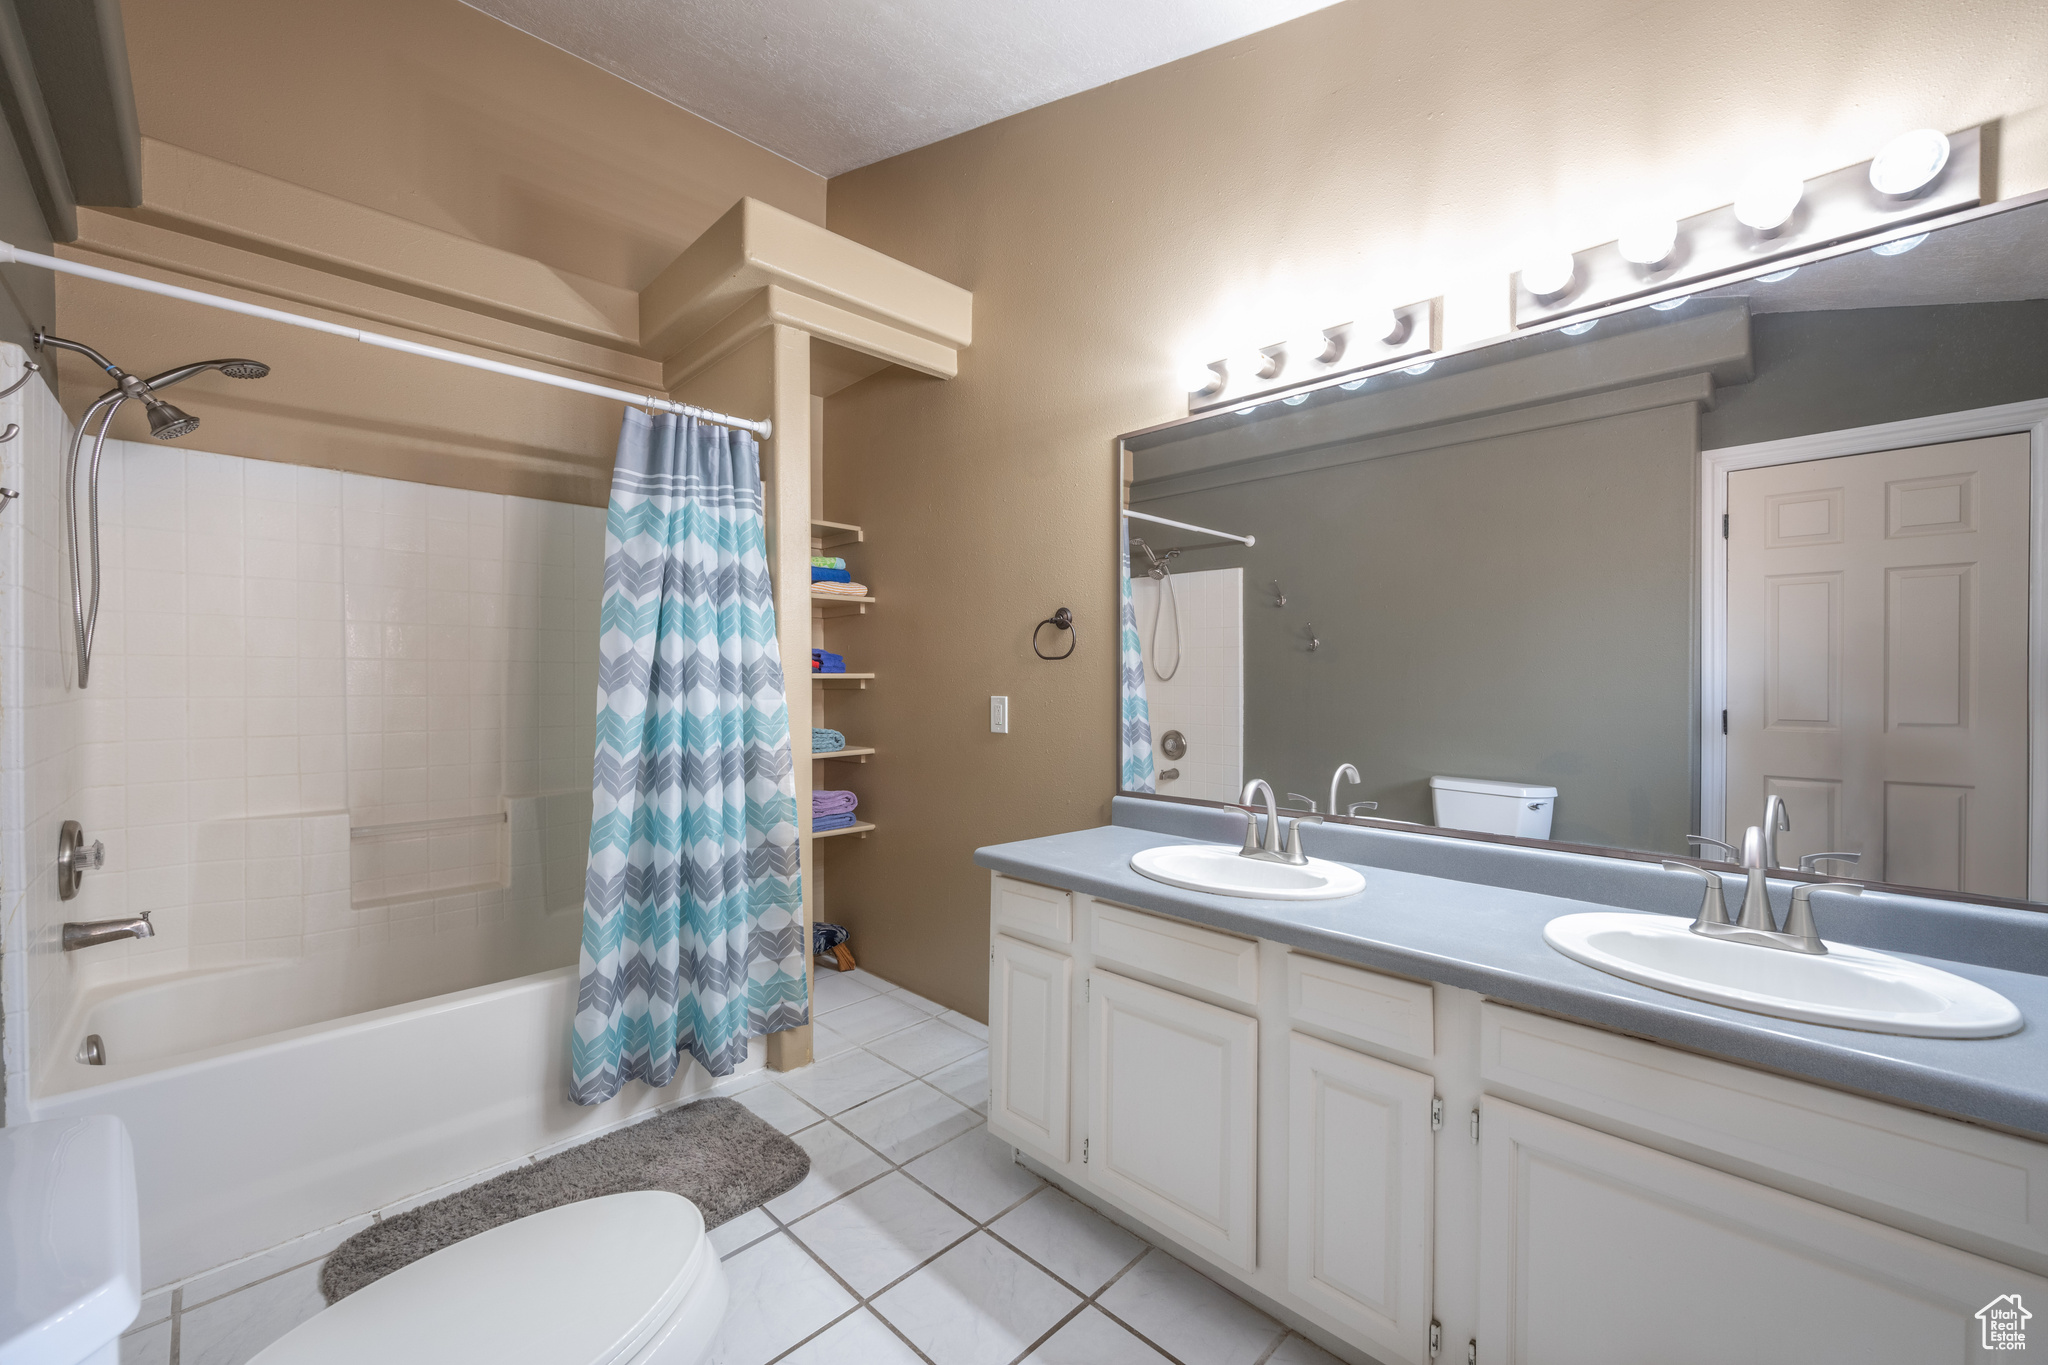 Full bathroom featuring tile floors, shower / bathtub combination with curtain, toilet, and double sink vanity